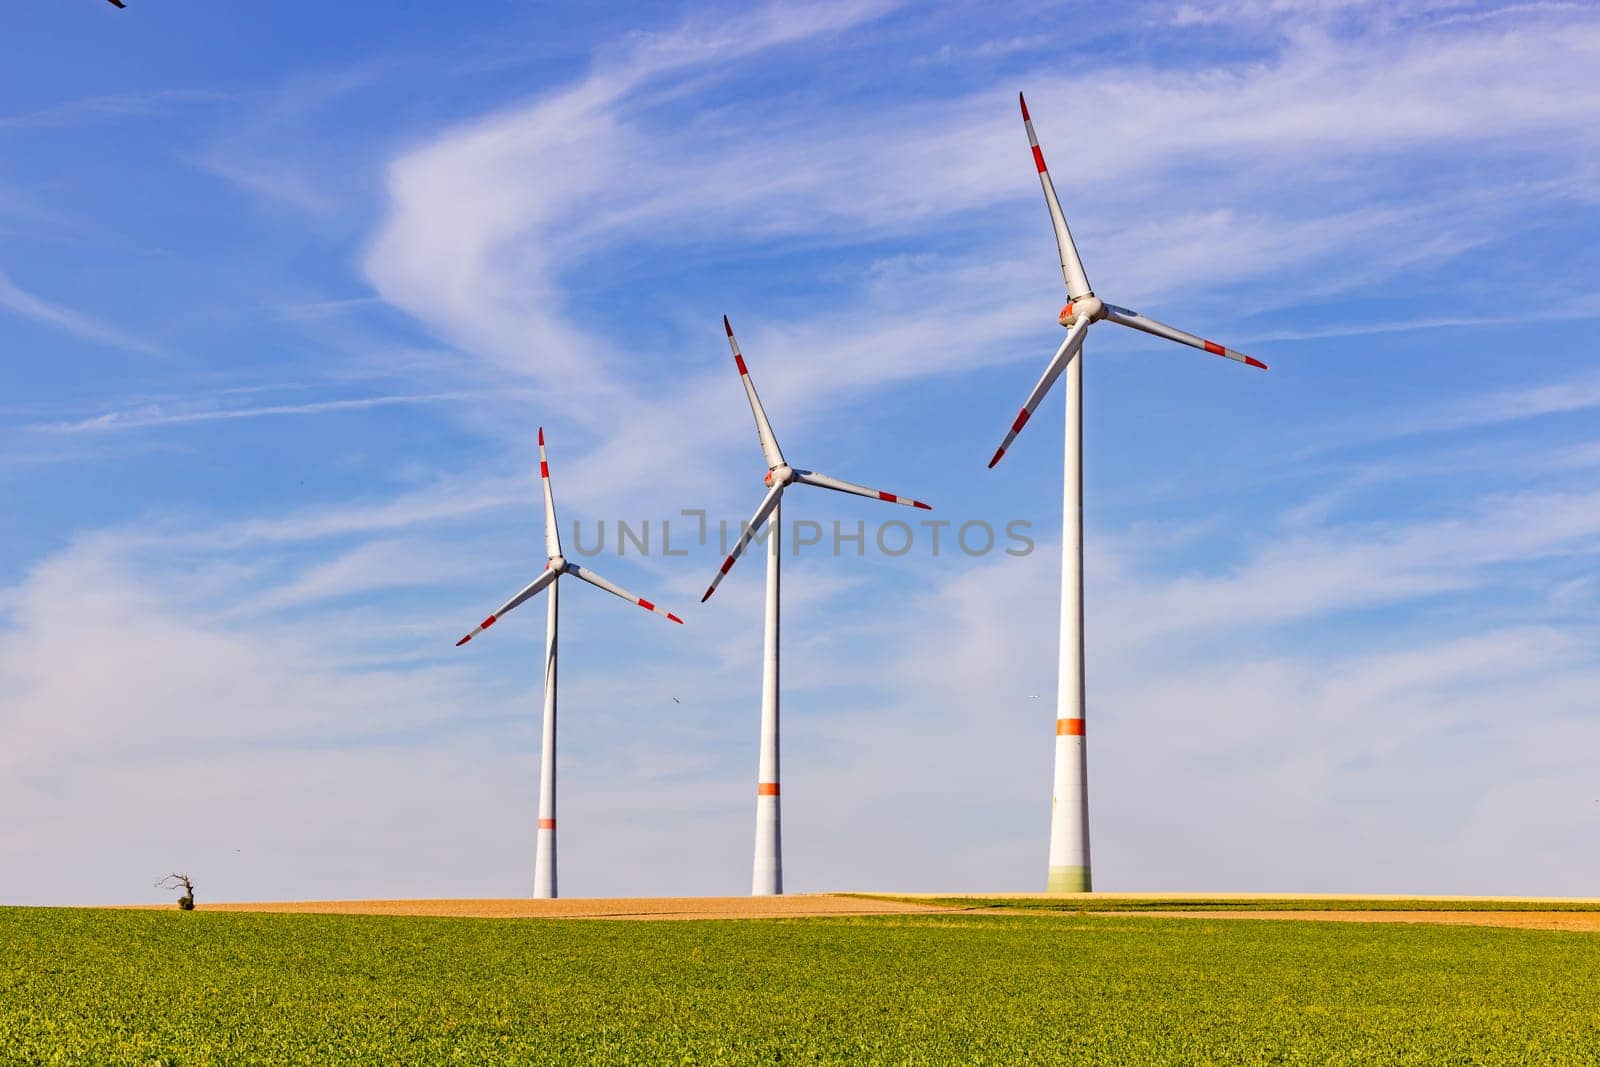 Three wind turbines of different sizes on an agricultural field next to a very small and stunted tree